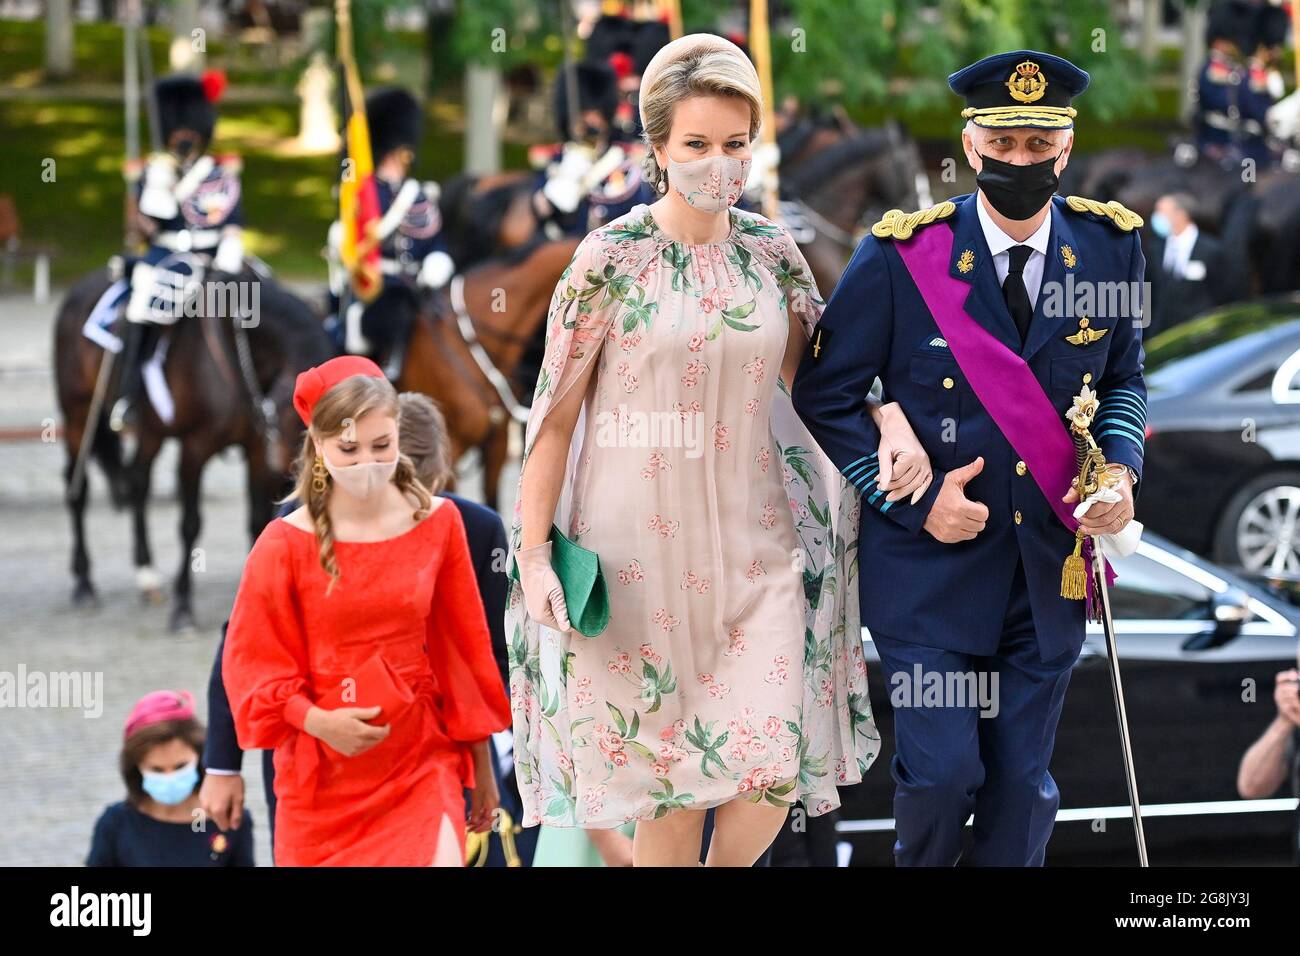 Crown Princess Elisabeth, Queen Mathilde of Belgium and King Philippe - Filip of Belgium arrive for the Te Deum mass, on the occasion of Today's Belgi Stock Photo